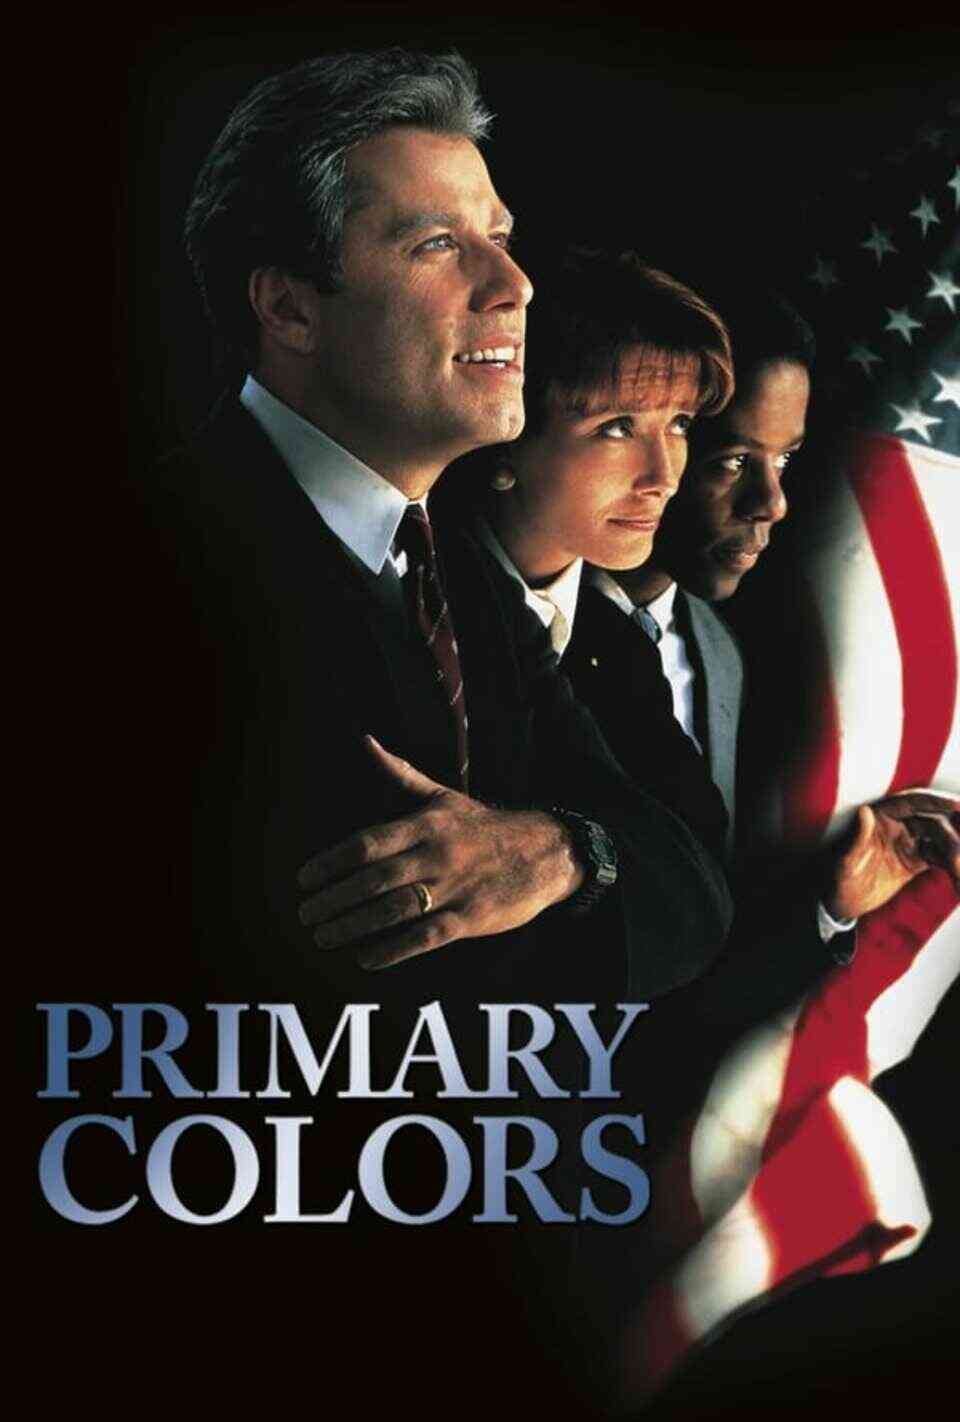 Read Primary Colors screenplay (poster)